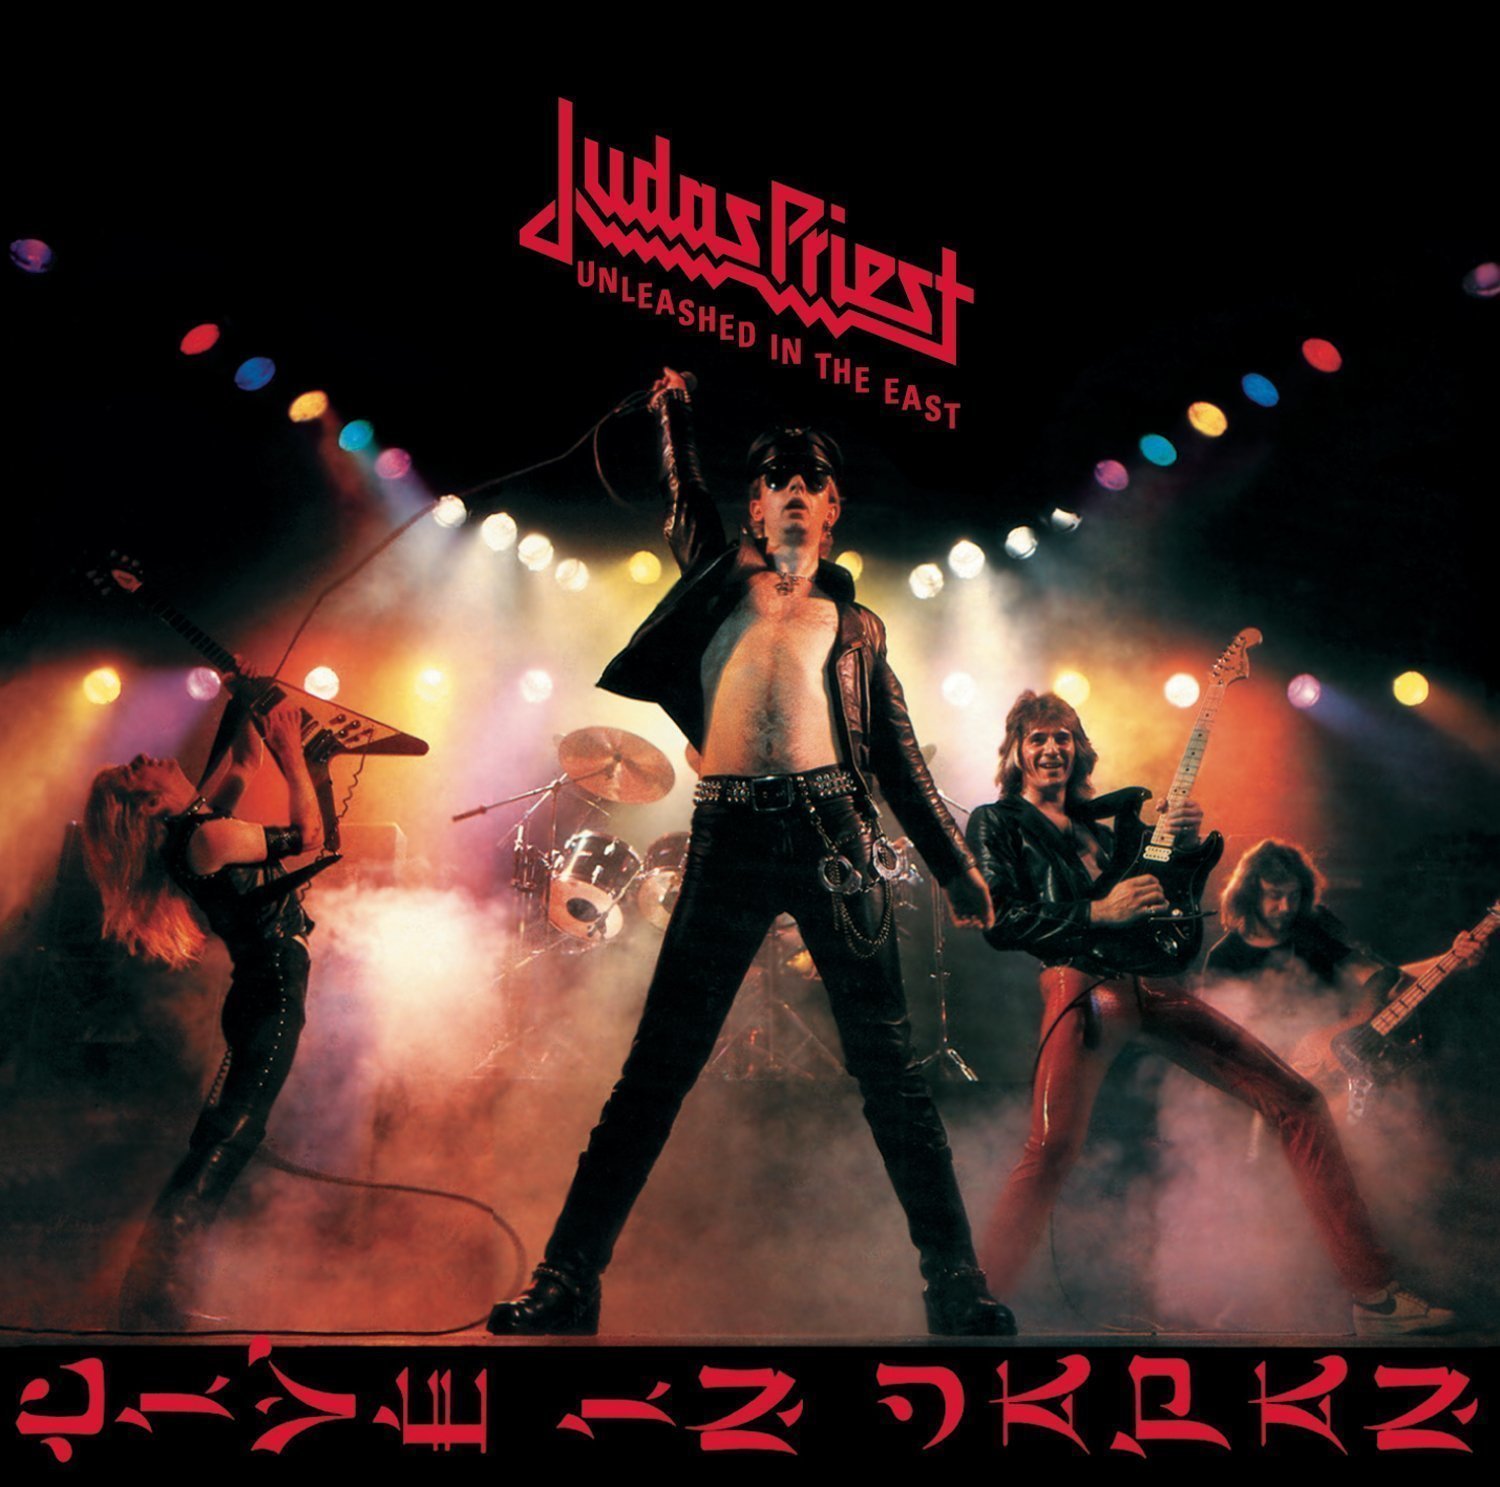 Judas Priest Unleashed In the East: Live In Japan (LP)